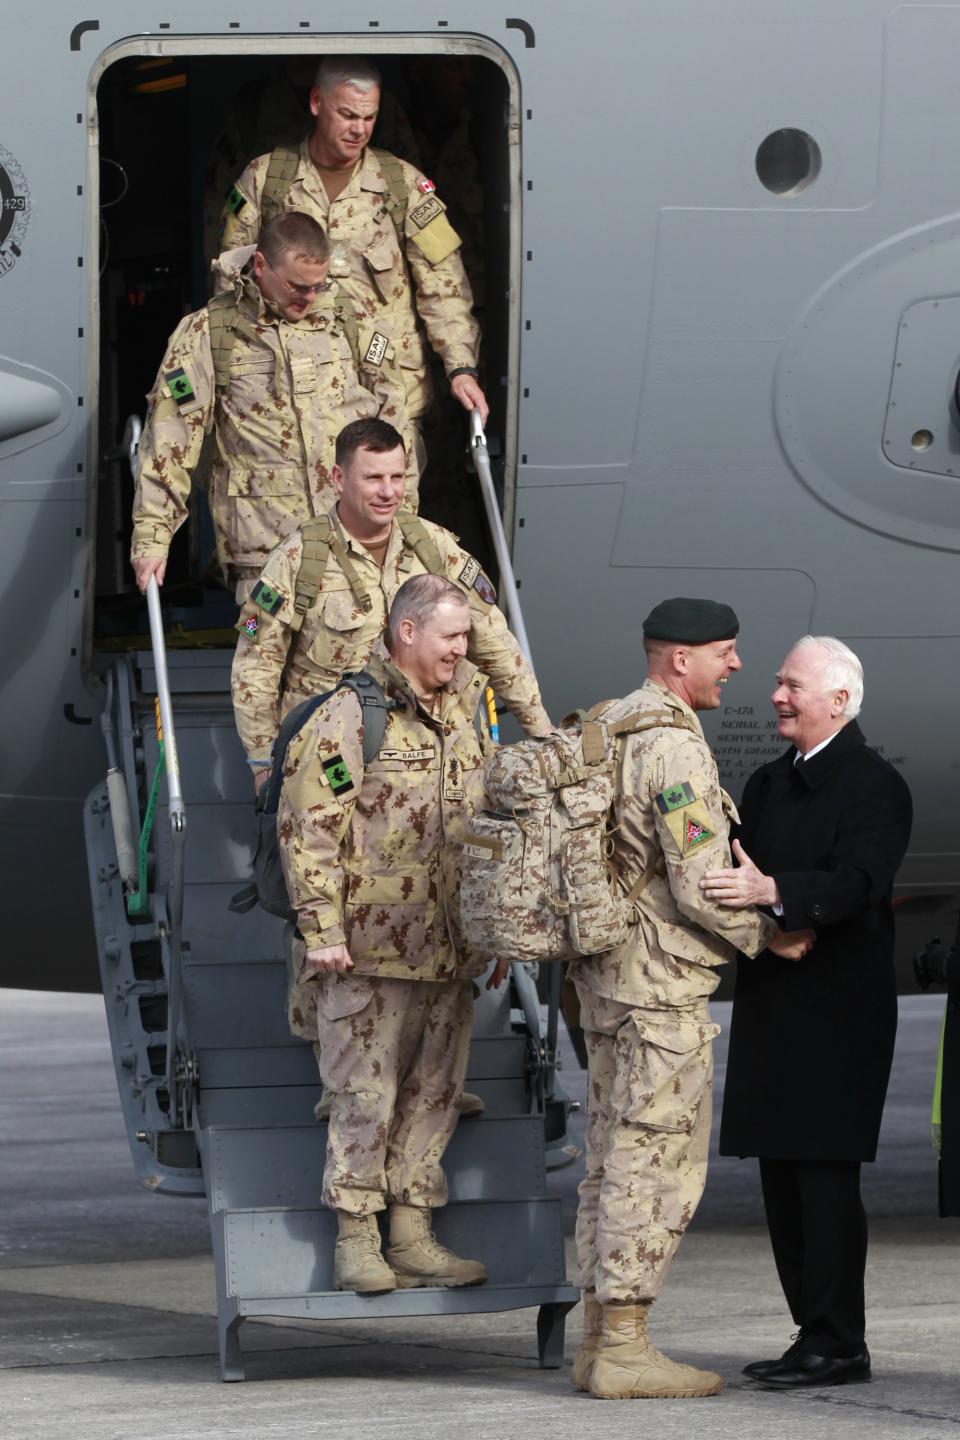 Canadian Army Major General Milner shakes hands with Canada's Governor General Johnston after arriving from Afghanistan, in Ottawa